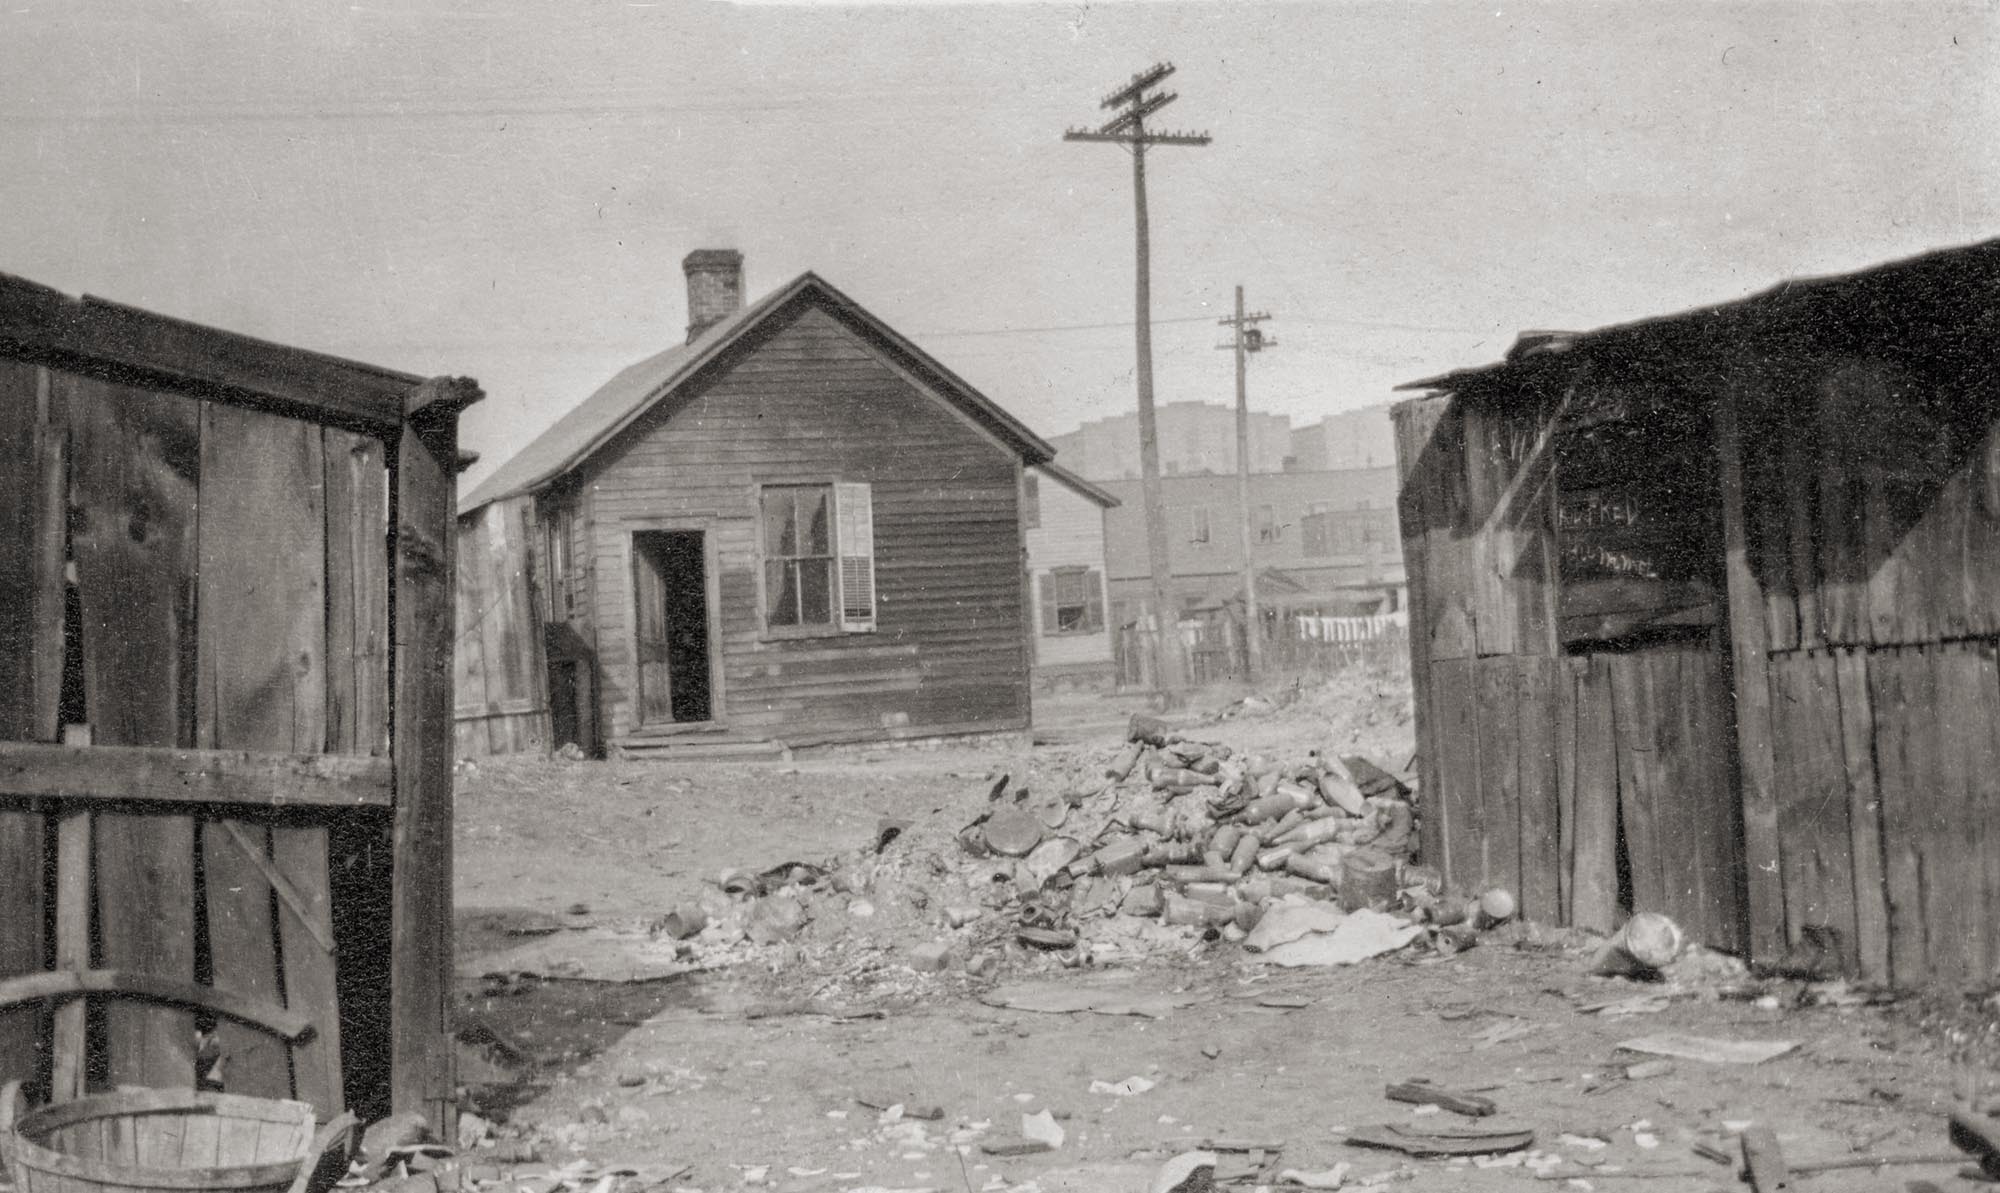 The slums at Cinder Point between the Railroad and Illinois River, at the foot of Sanger Street, nearby the Flatboat City locale, Peoria, Illinois, circa mid-1930s. The Hiram Walker & Sons Distillery plant can be seen in the background. Picture taken by an unknown employee of the Neighborhood House social service agency, which delivered meals to kids and the elderly. 

Neighborhood House Association, 1020 S. Matthew, Peoria IL, established in 1896, is dedicated to providing a Safe Haven with comprehensive services that meet the social, emotional and material needs of individuals and families from infancy to the elderly.